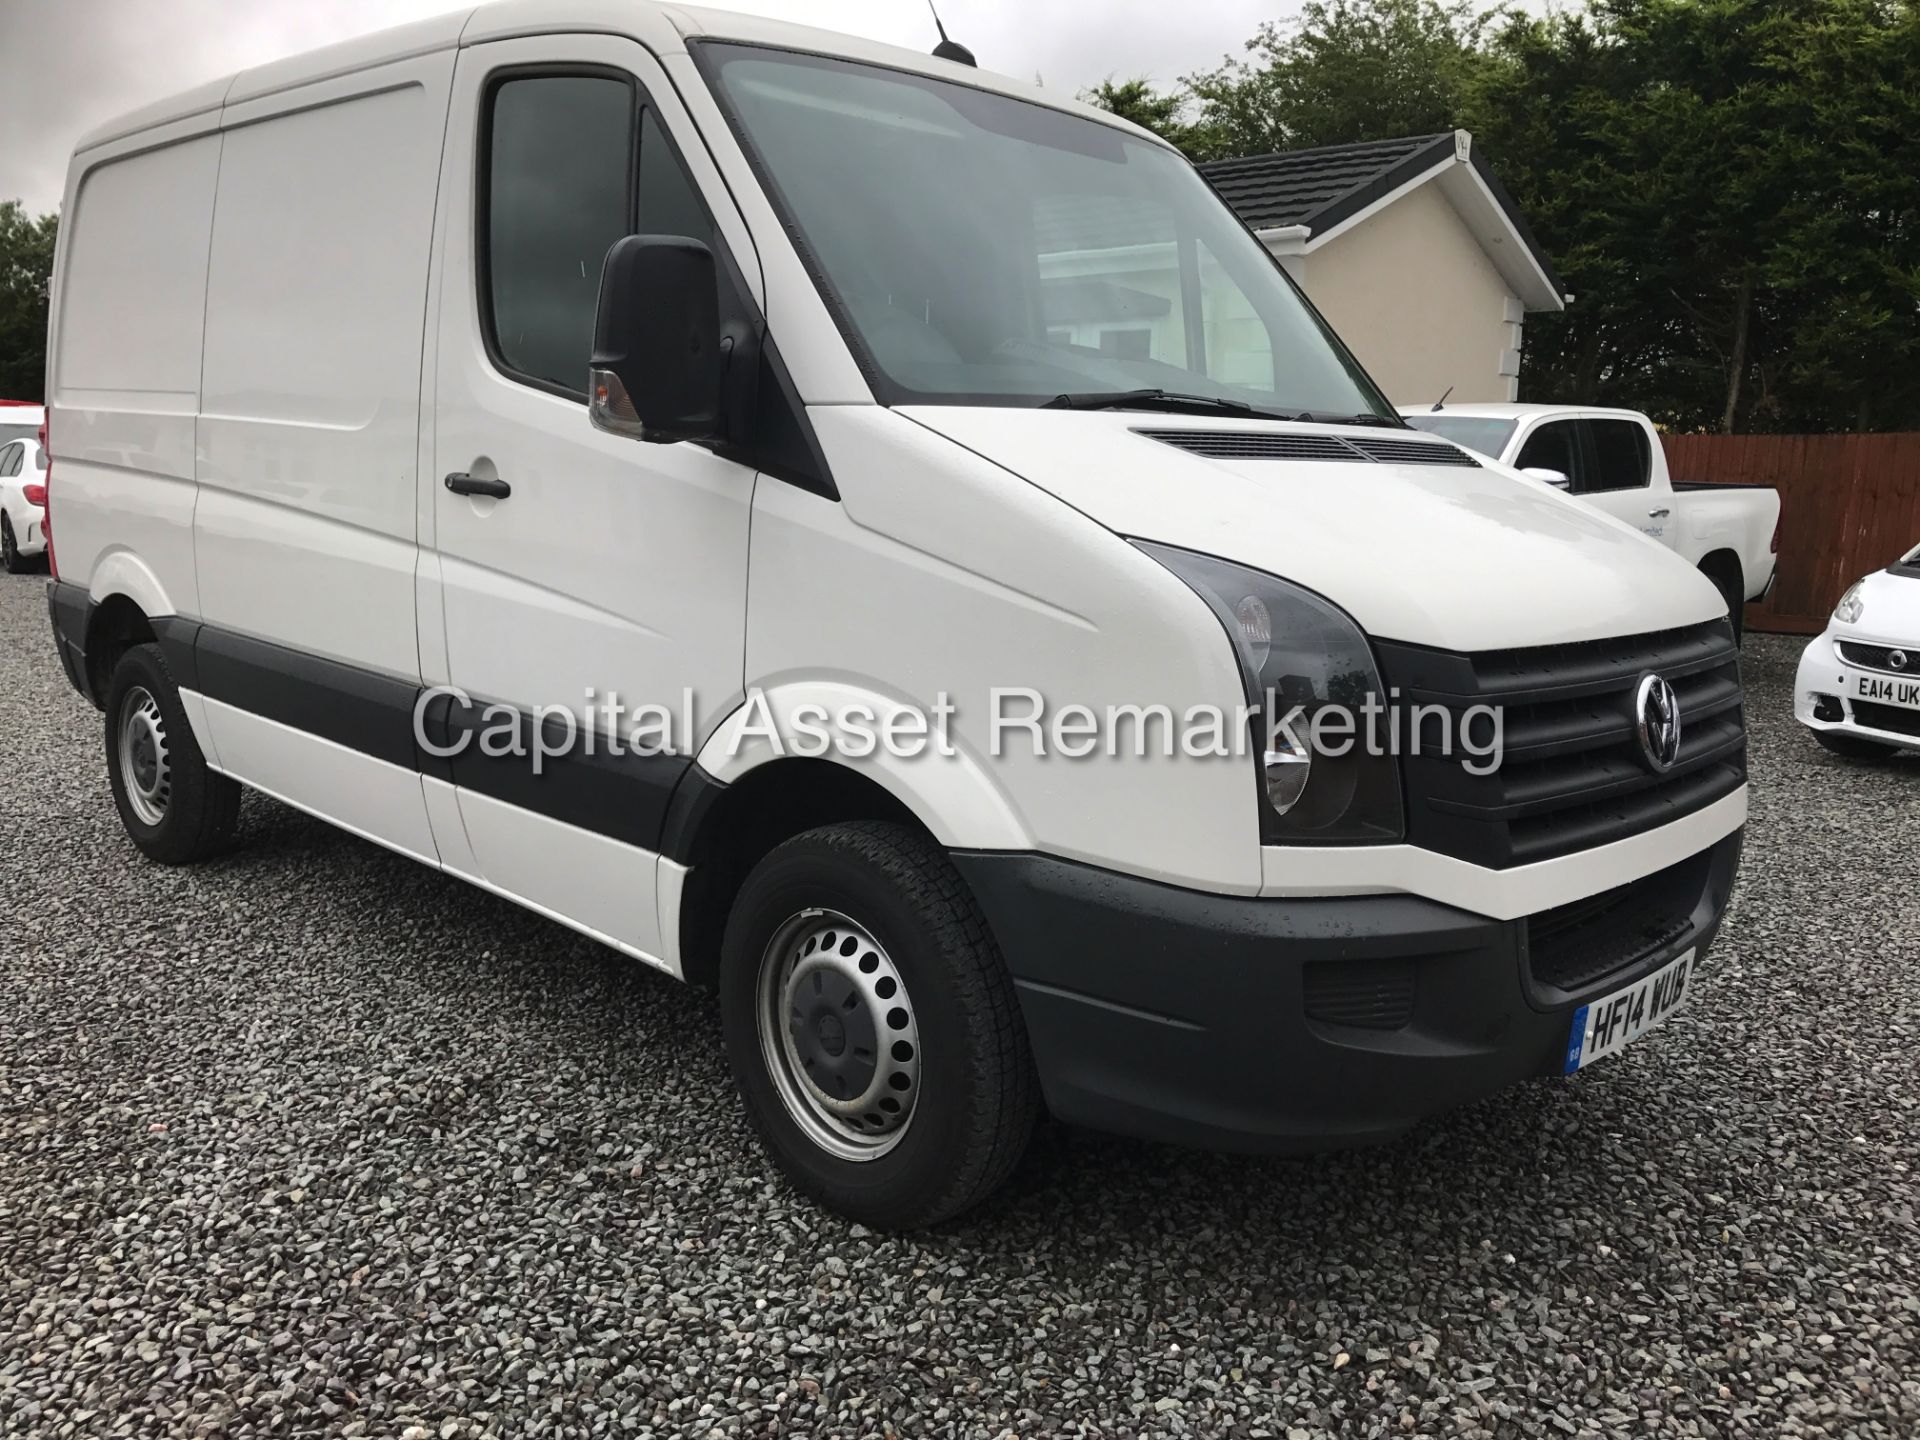 VOLKSWAGEN CRAFTER CR30 SWB 2.0TDI (109) - NEW SHAPE - 14 REG - MASSIVE SPEC - AIR CON!! - 1 OWNER! - Image 3 of 13